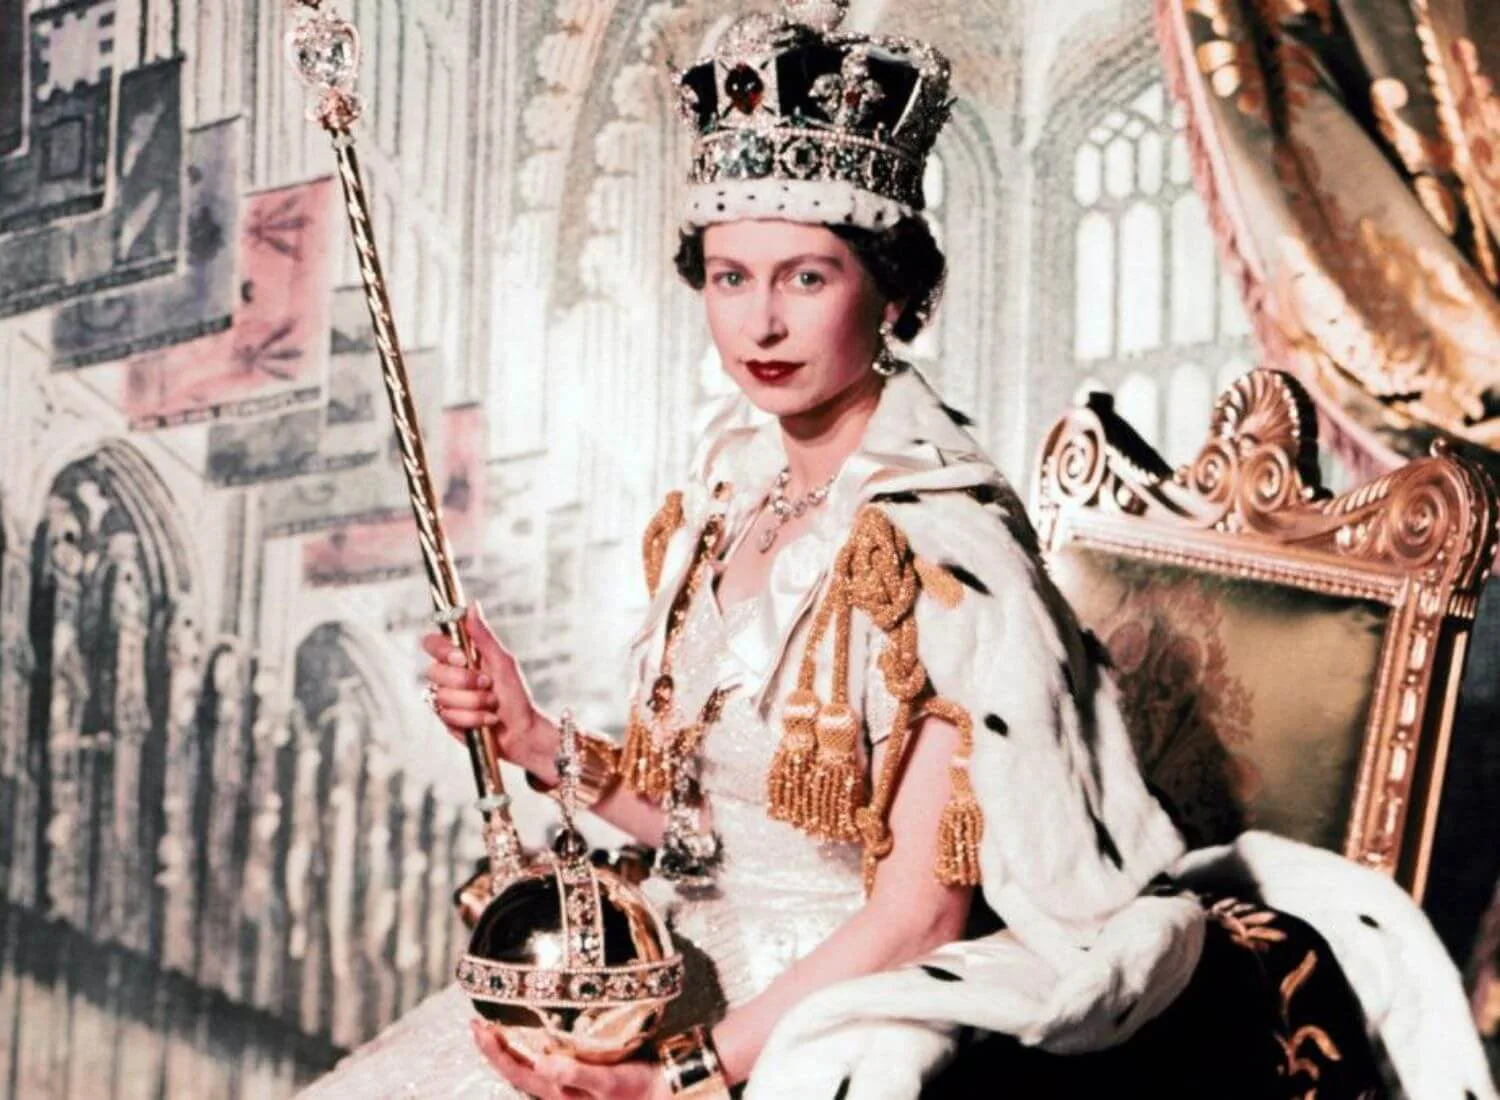 Queen Elizabeth II And Cannibalism: Truth Or Conspiracy Theory?